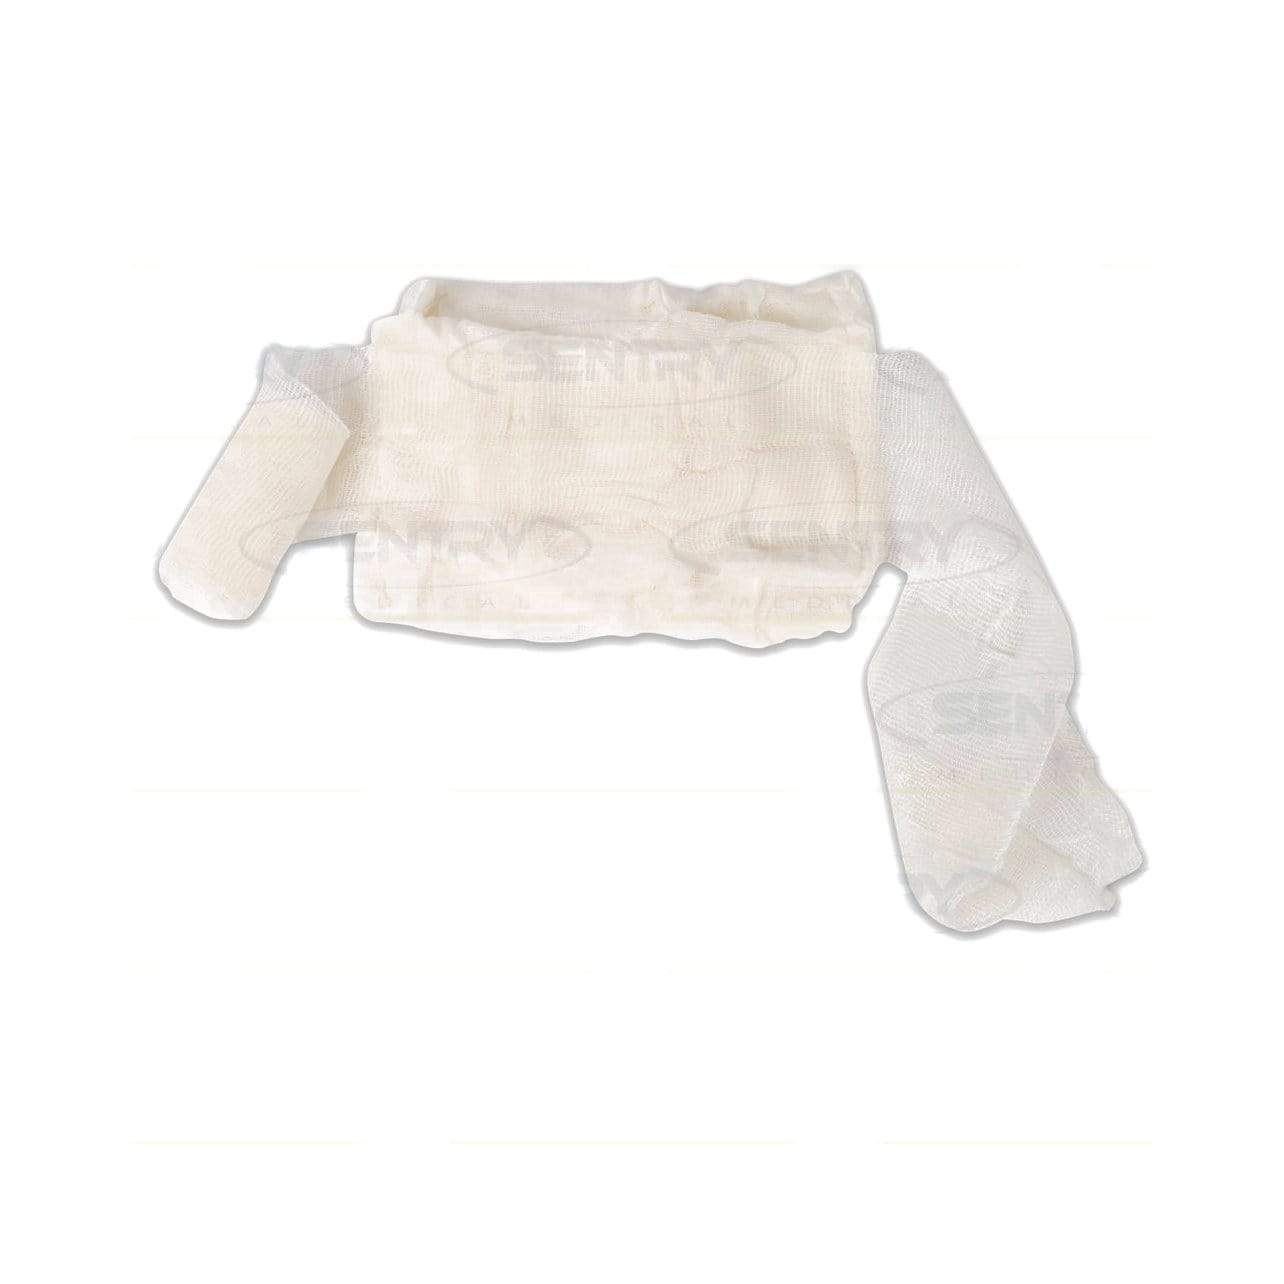 Sentry Medical Wound Dressings No. 13 / Sterile Sentry Wound Dressing